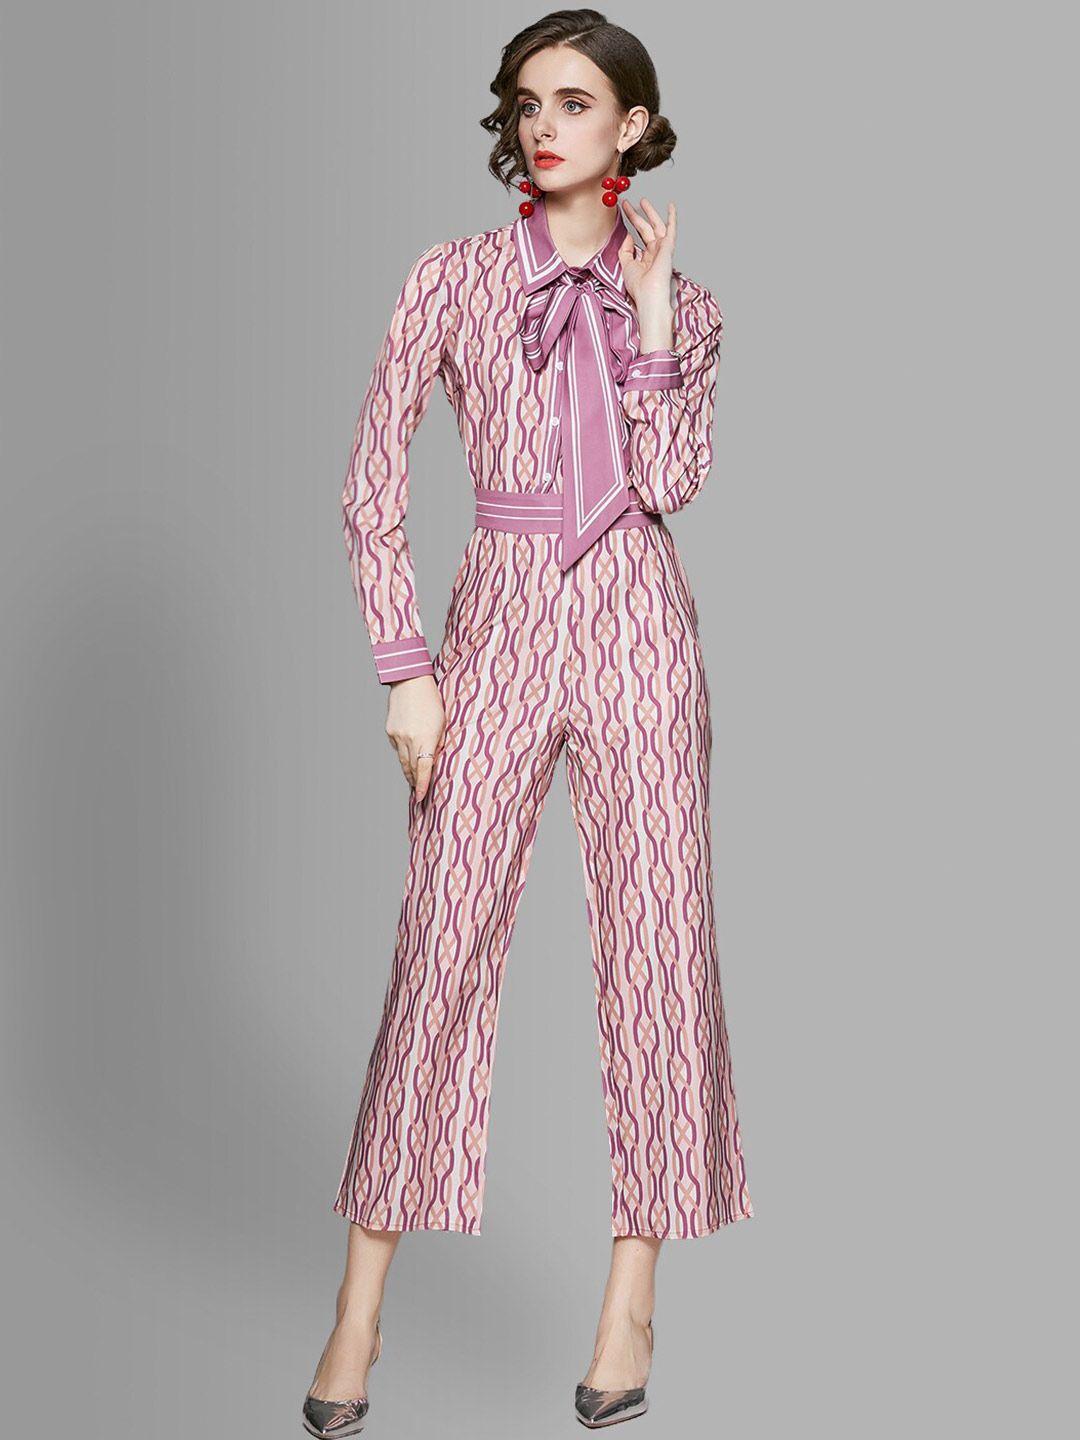 jc collection women pink & yellow printed shirt with trousers co-ords set